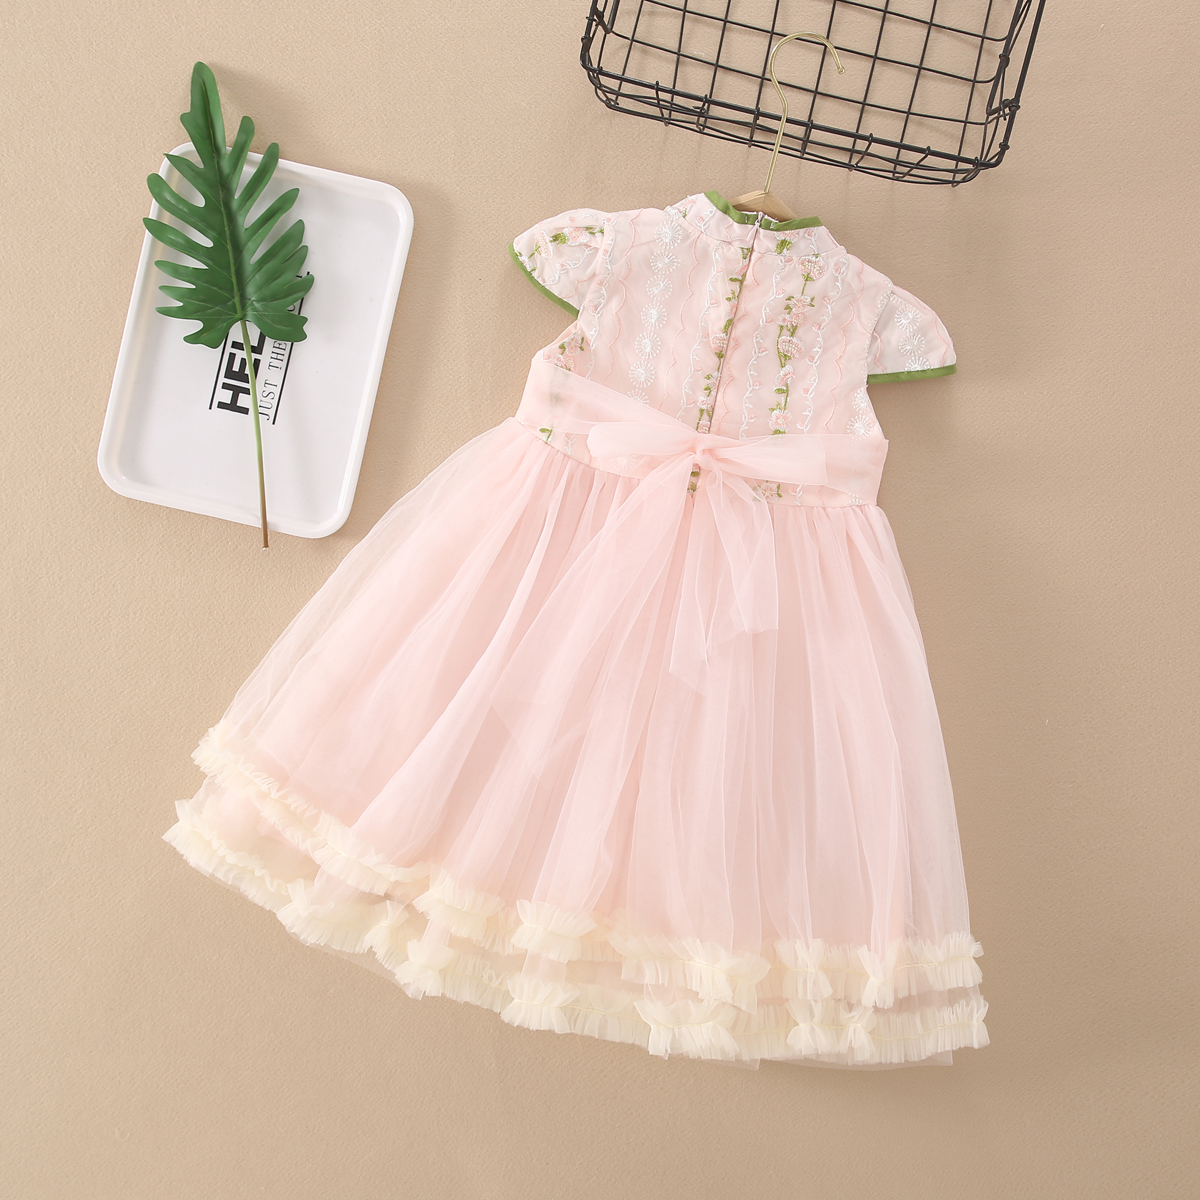 Chinese style pink green mesh little girls dresses kids clothing wholesale labels free samples